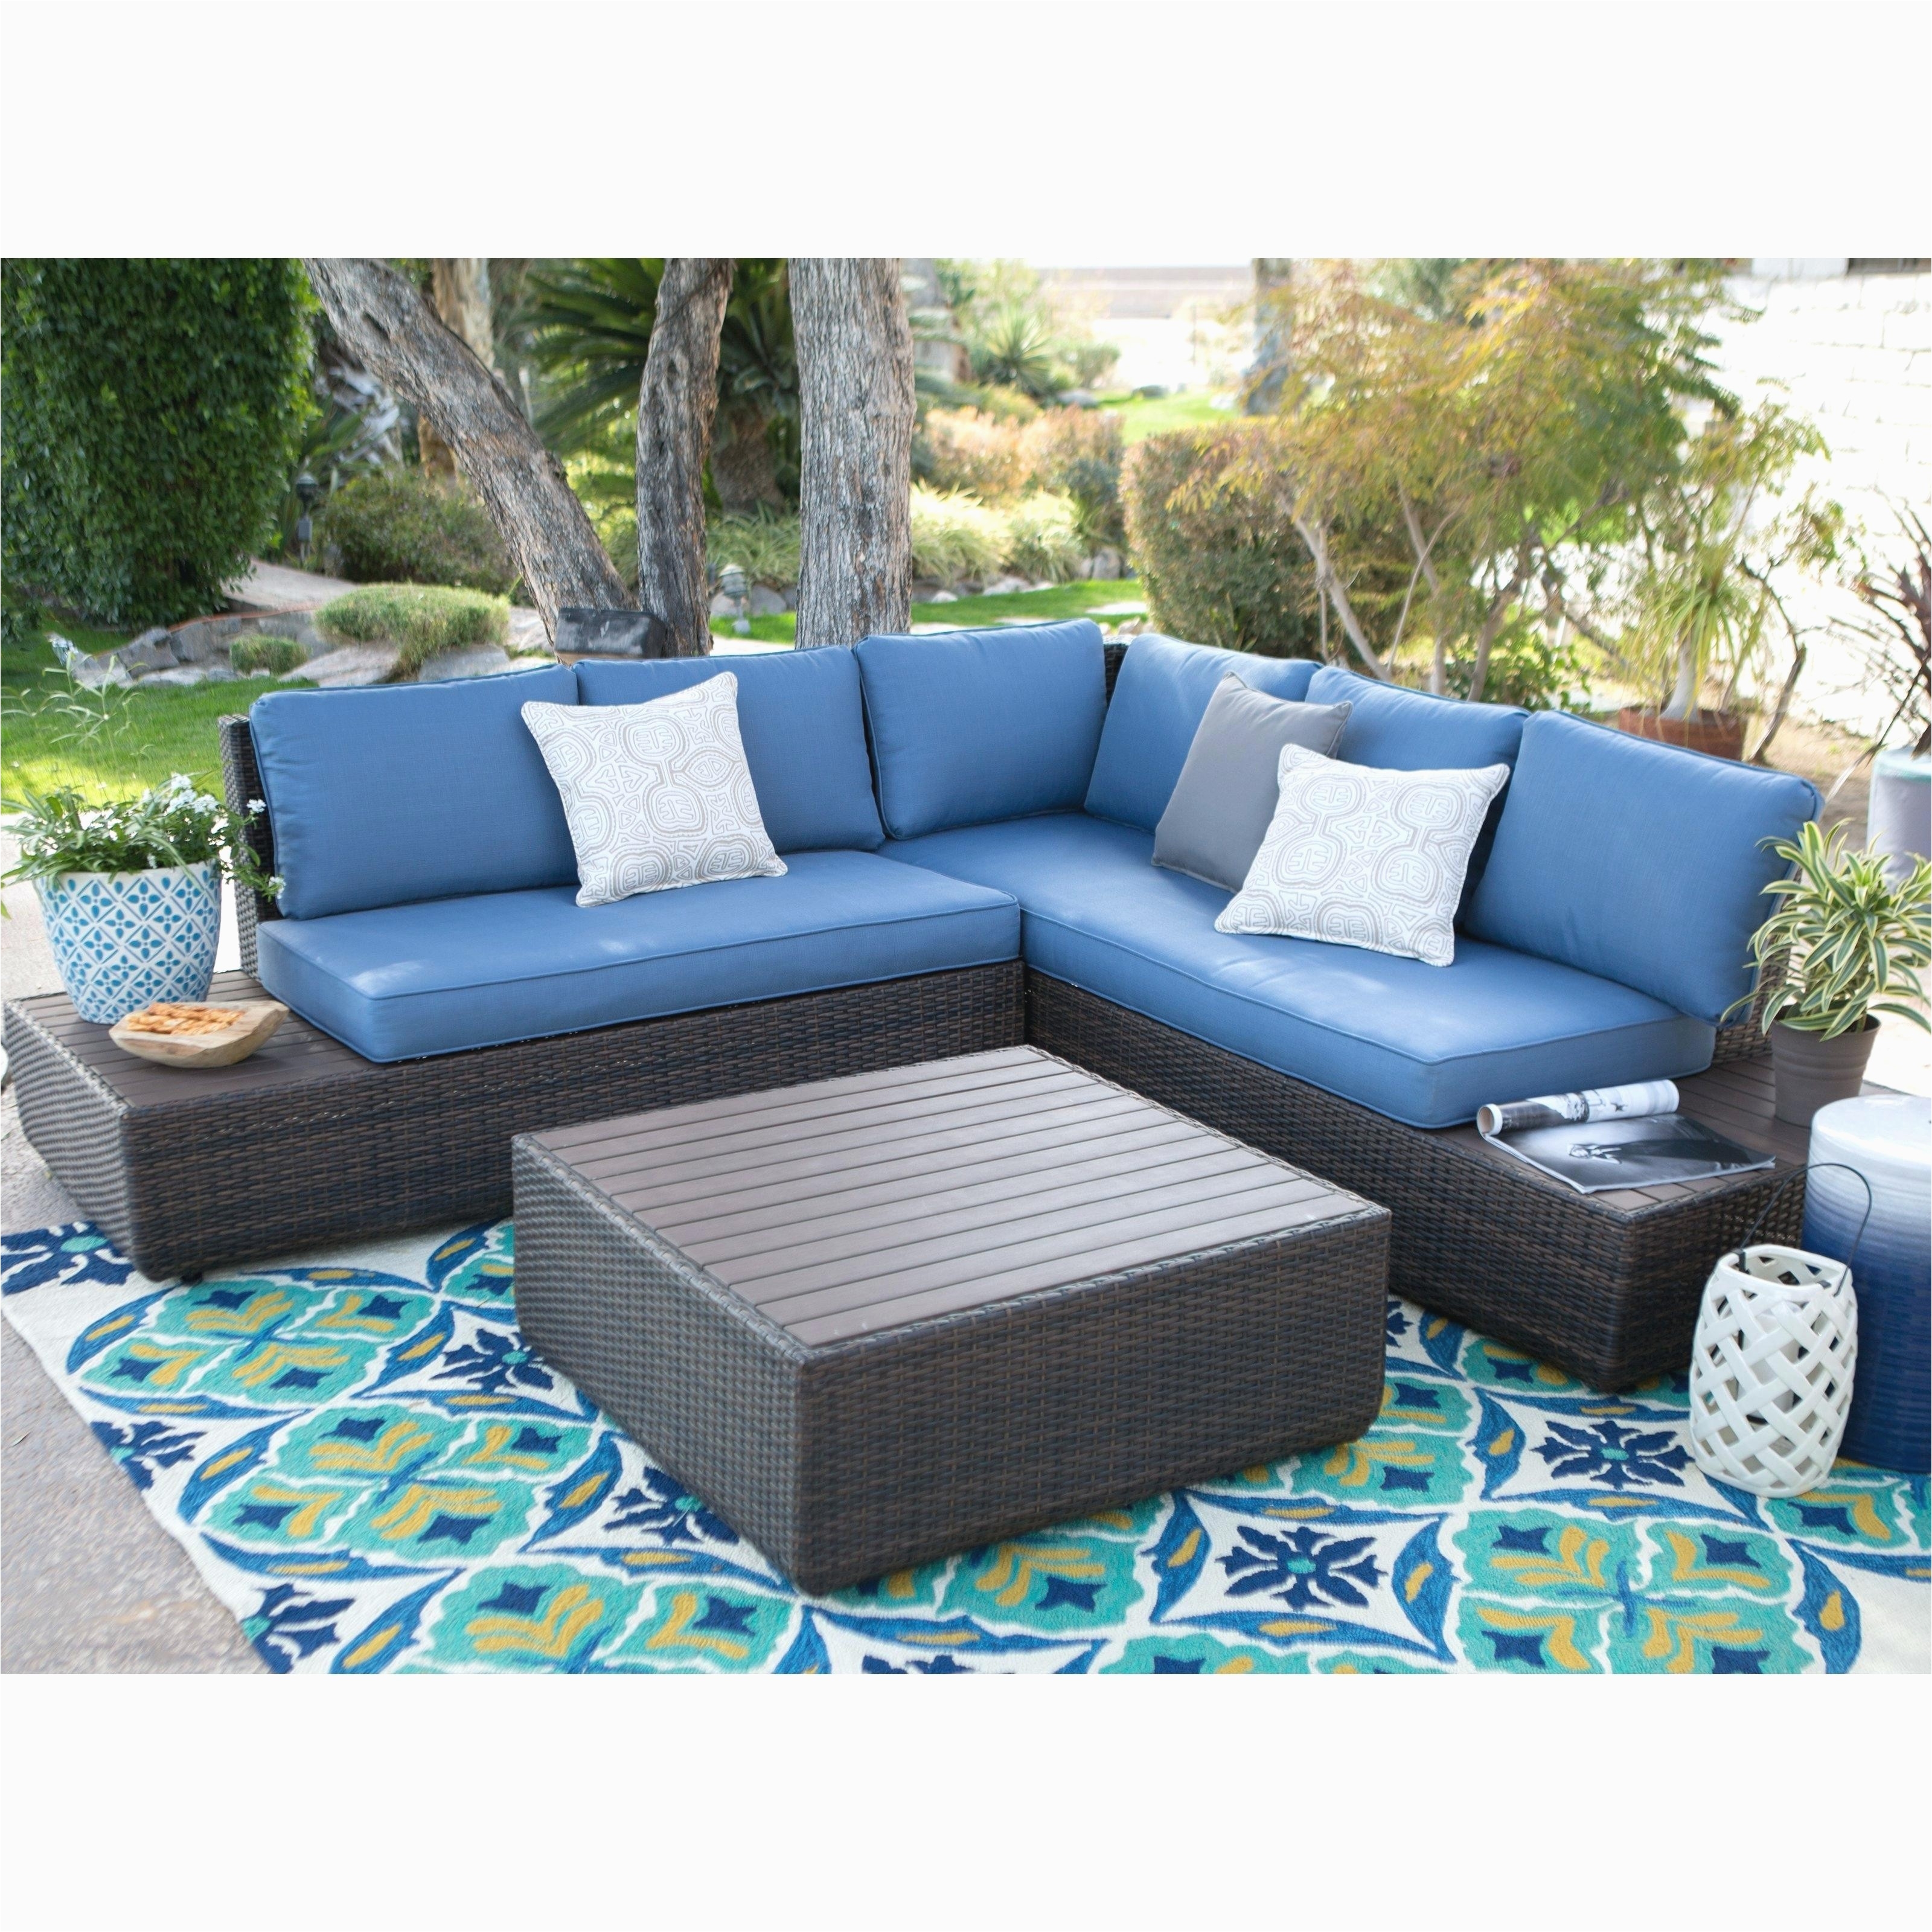 sofas at big lots new big lots patio sets best best big lots furniture prices